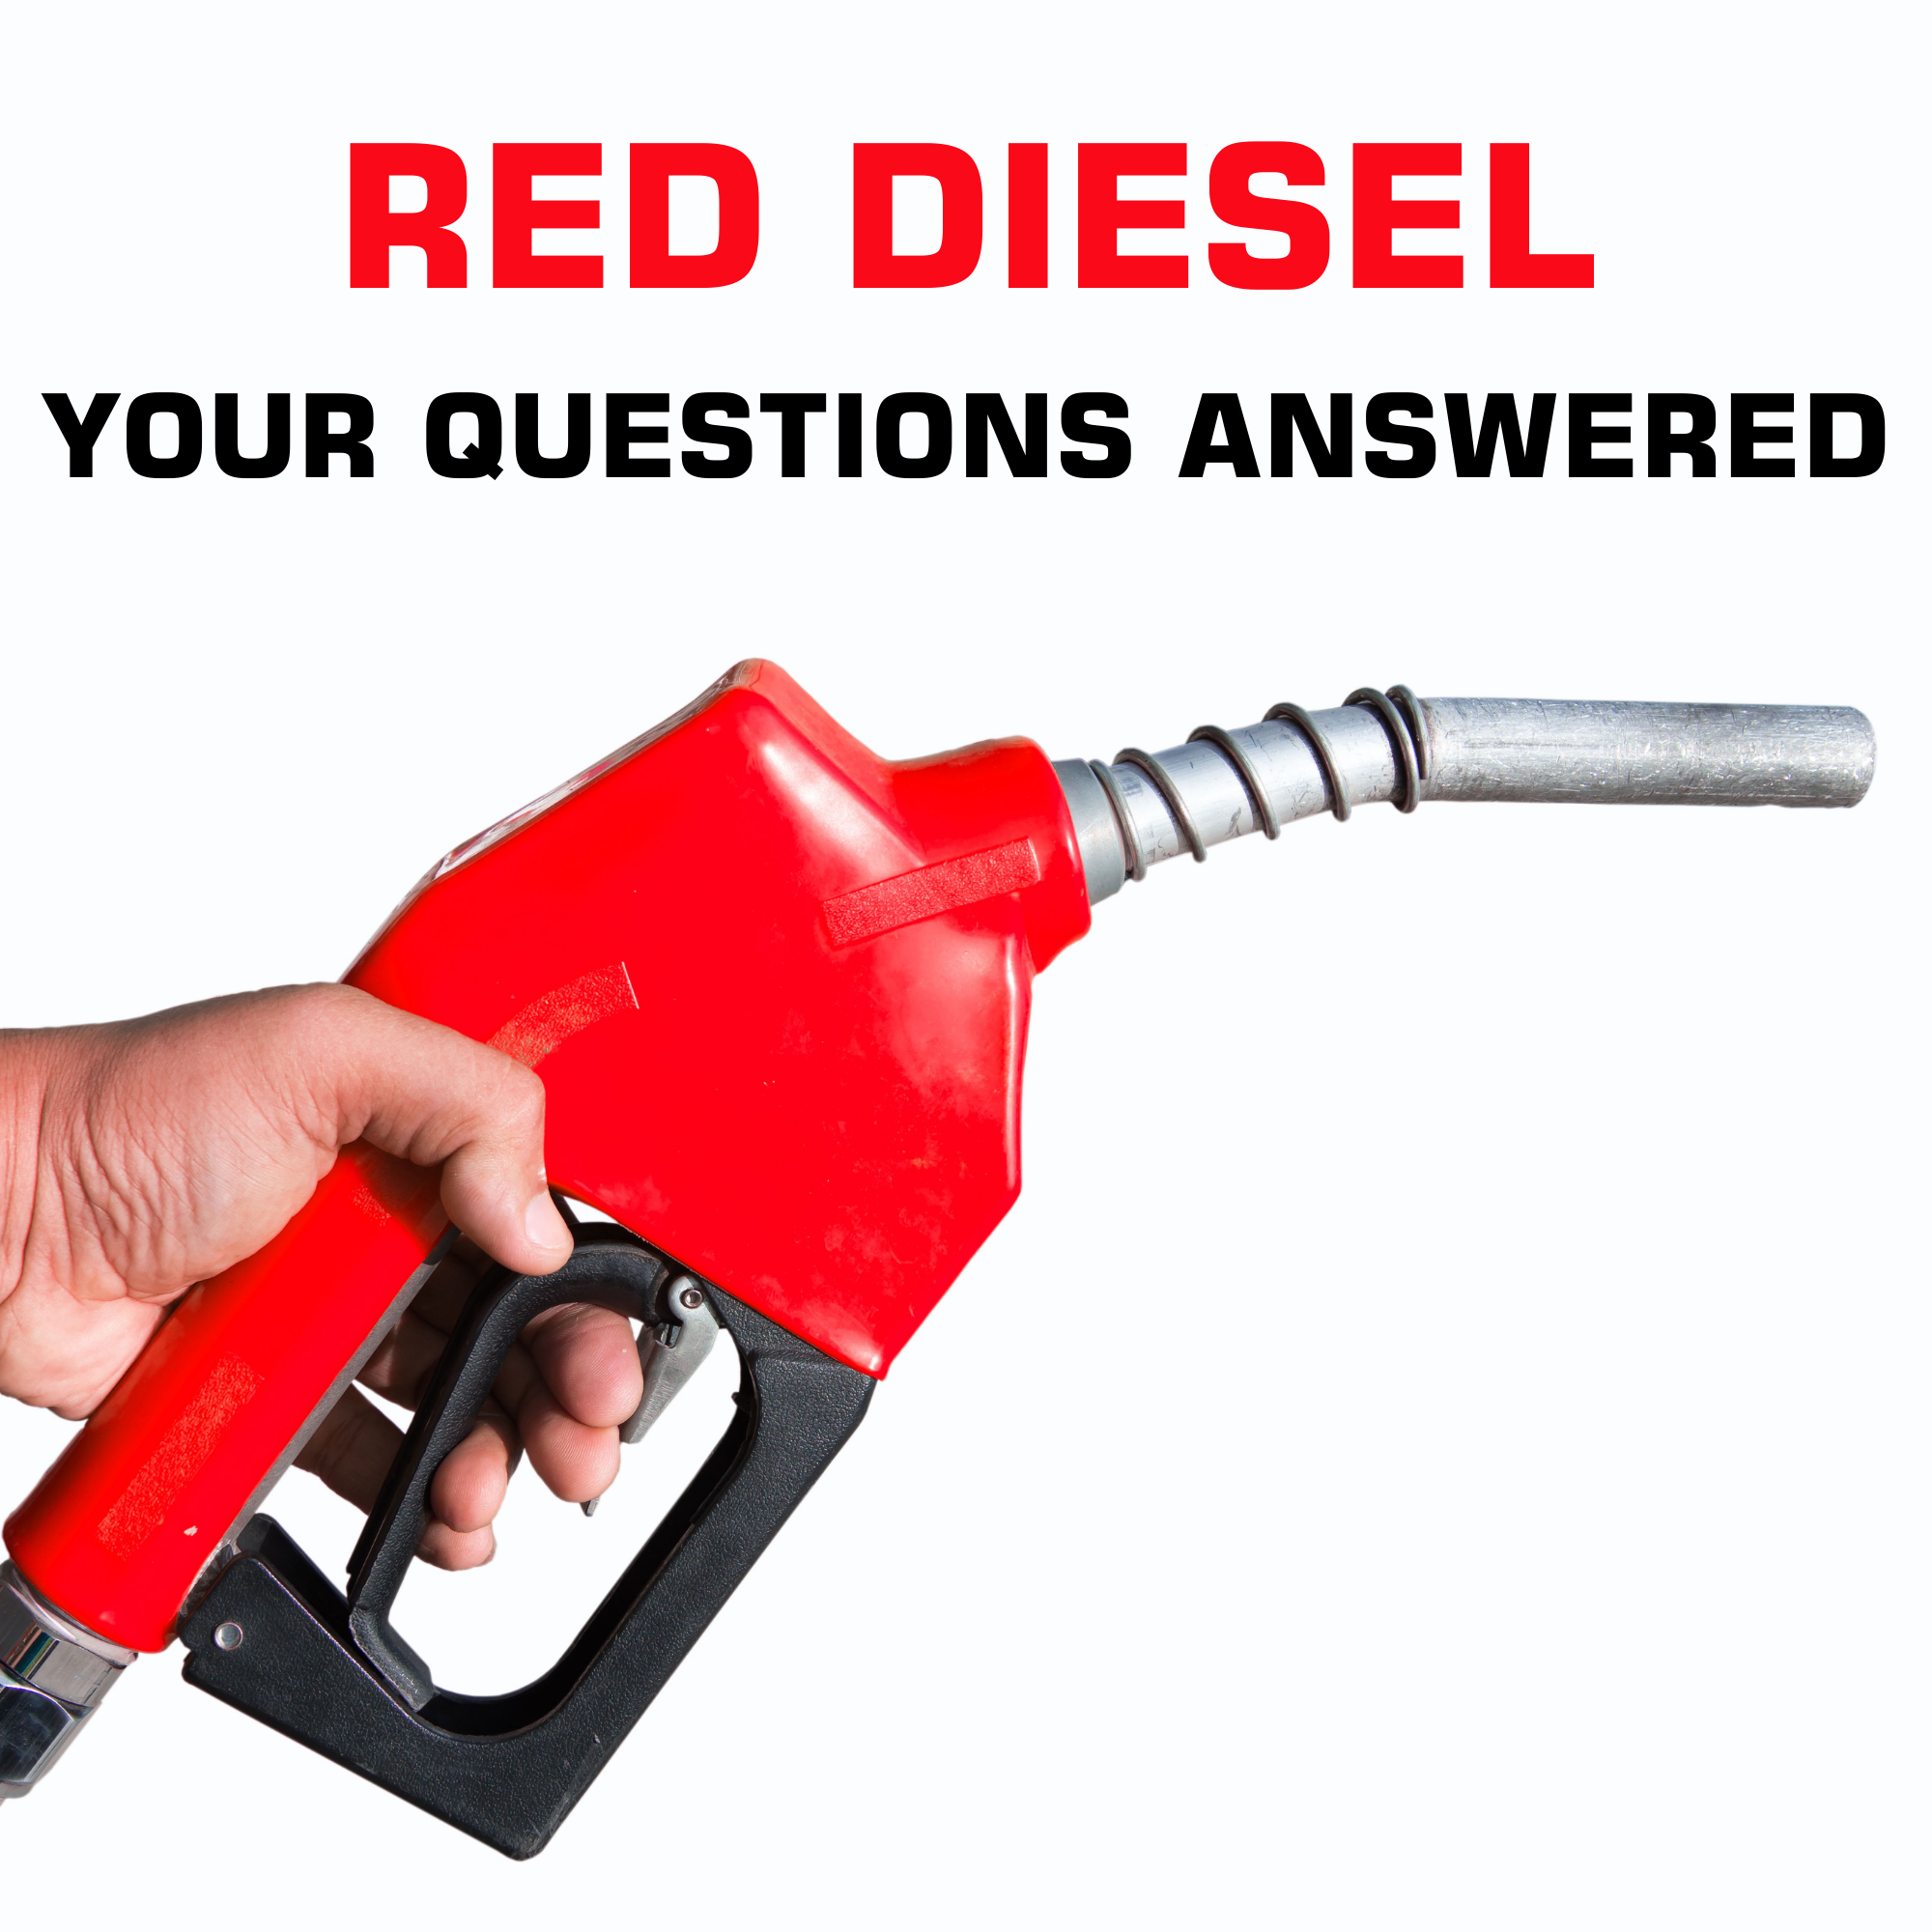 Diesel engines: your questions answered